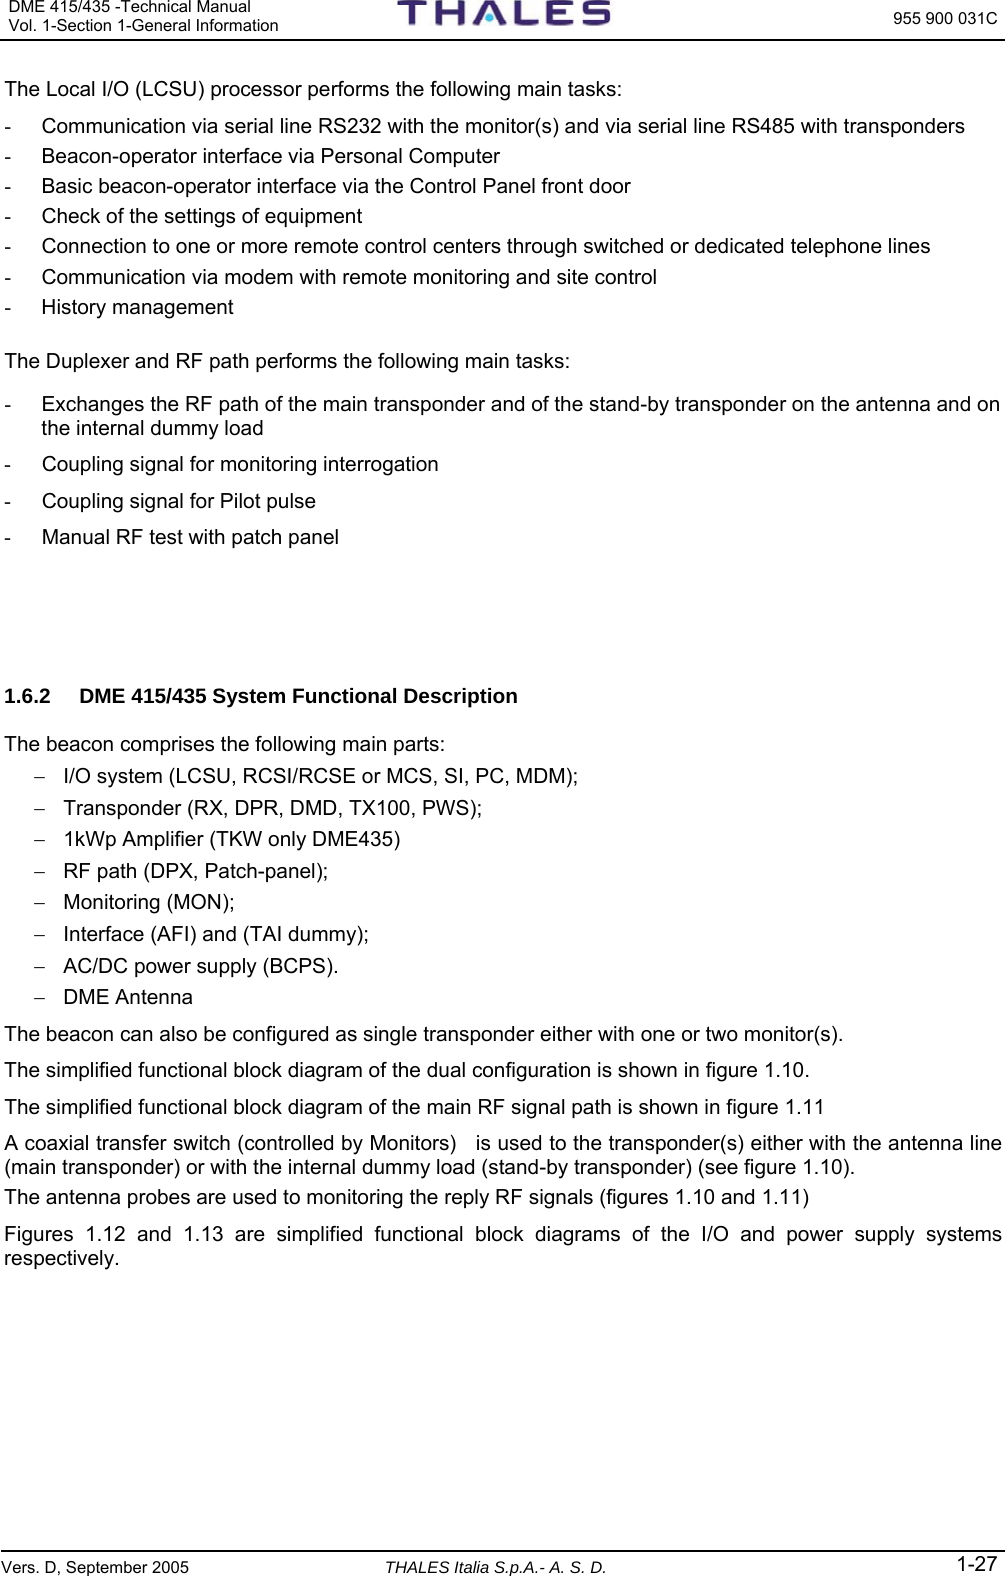 DME 415/435 -Technical Manual Vol. 1-Section 1-General Information  955 900 031C Vers. D, September 2005 THALES Italia S.p.A.- A. S. D. 1-27 The Local I/O (LCSU) processor performs the following main tasks: -  Communication via serial line RS232 with the monitor(s) and via serial line RS485 with transponders -  Beacon-operator interface via Personal Computer -  Basic beacon-operator interface via the Control Panel front door -  Check of the settings of equipment -  Connection to one or more remote control centers through switched or dedicated telephone lines  -  Communication via modem with remote monitoring and site control - History management   The Duplexer and RF path performs the following main tasks: -  Exchanges the RF path of the main transponder and of the stand-by transponder on the antenna and on the internal dummy load  -  Coupling signal for monitoring interrogation  -  Coupling signal for Pilot pulse -  Manual RF test with patch panel    1.6.2  DME 415/435 System Functional Description The beacon comprises the following main parts: −  I/O system (LCSU, RCSI/RCSE or MCS, SI, PC, MDM); −  Transponder (RX, DPR, DMD, TX100, PWS); −  1kWp Amplifier (TKW only DME435) −  RF path (DPX, Patch-panel); − Monitoring (MON); −  Interface (AFI) and (TAI dummy); −  AC/DC power supply (BCPS). − DME Antenna The beacon can also be configured as single transponder either with one or two monitor(s).  The simplified functional block diagram of the dual configuration is shown in figure 1.10.  The simplified functional block diagram of the main RF signal path is shown in figure 1.11 A coaxial transfer switch (controlled by Monitors)   is used to the transponder(s) either with the antenna line (main transponder) or with the internal dummy load (stand-by transponder) (see figure 1.10). The antenna probes are used to monitoring the reply RF signals (figures 1.10 and 1.11) Figures  1.12 and 1.13 are simplified functional block diagrams of the I/O and power supply systems respectively. 